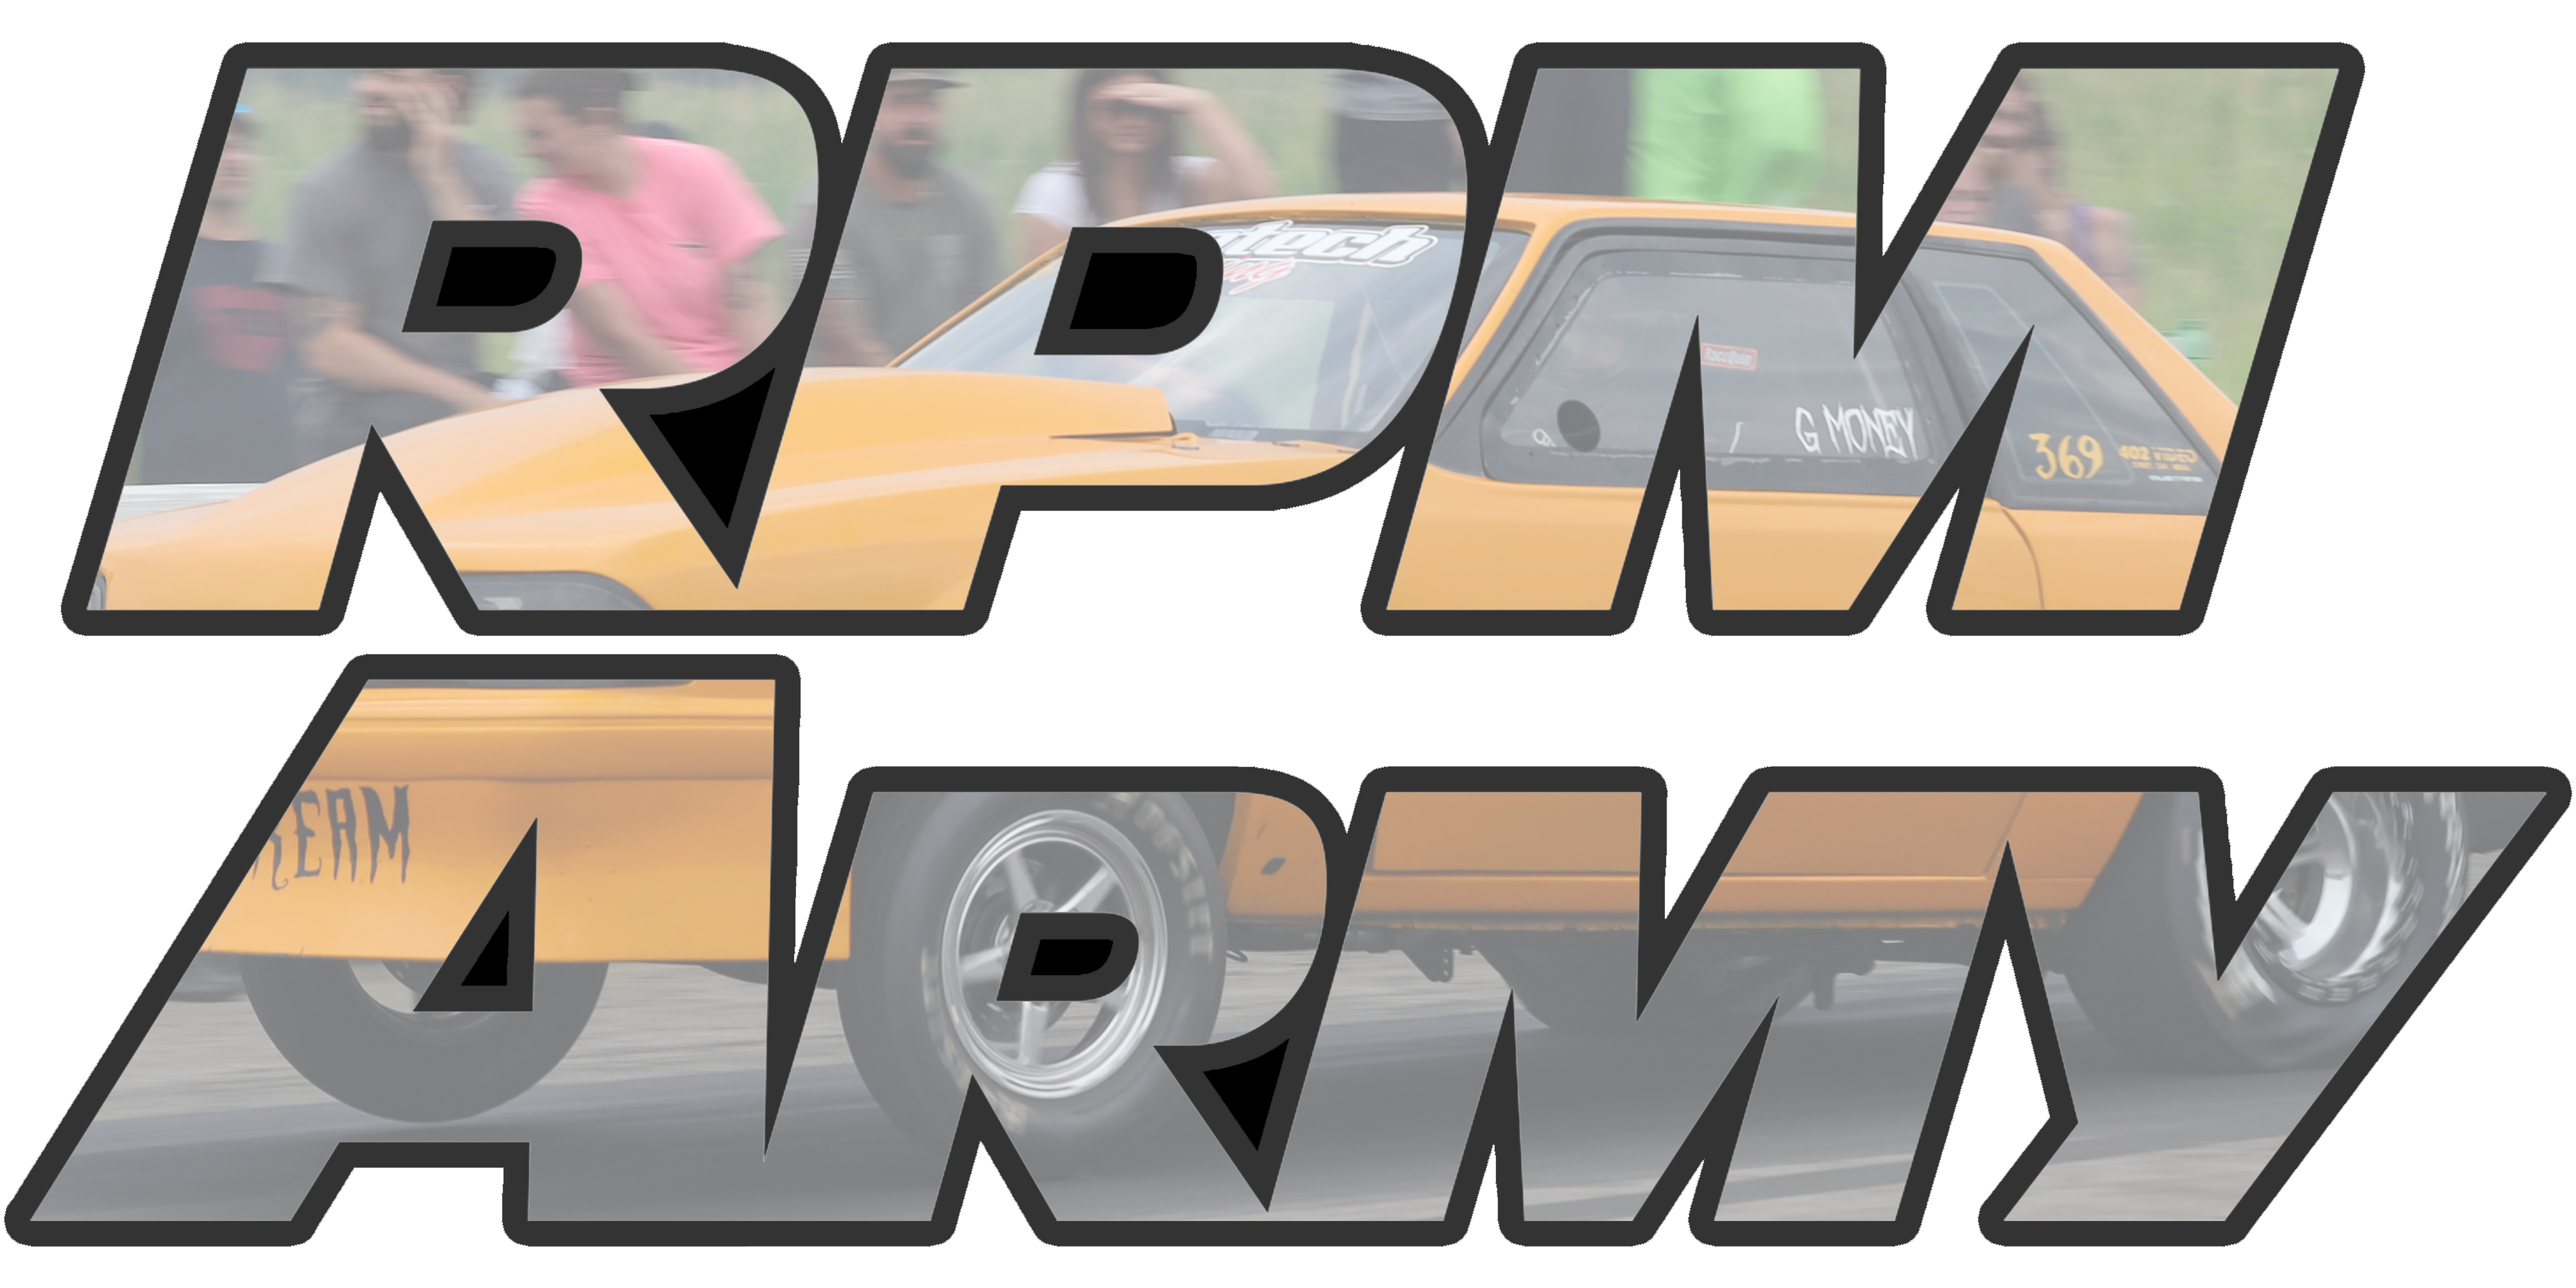 RPM Army